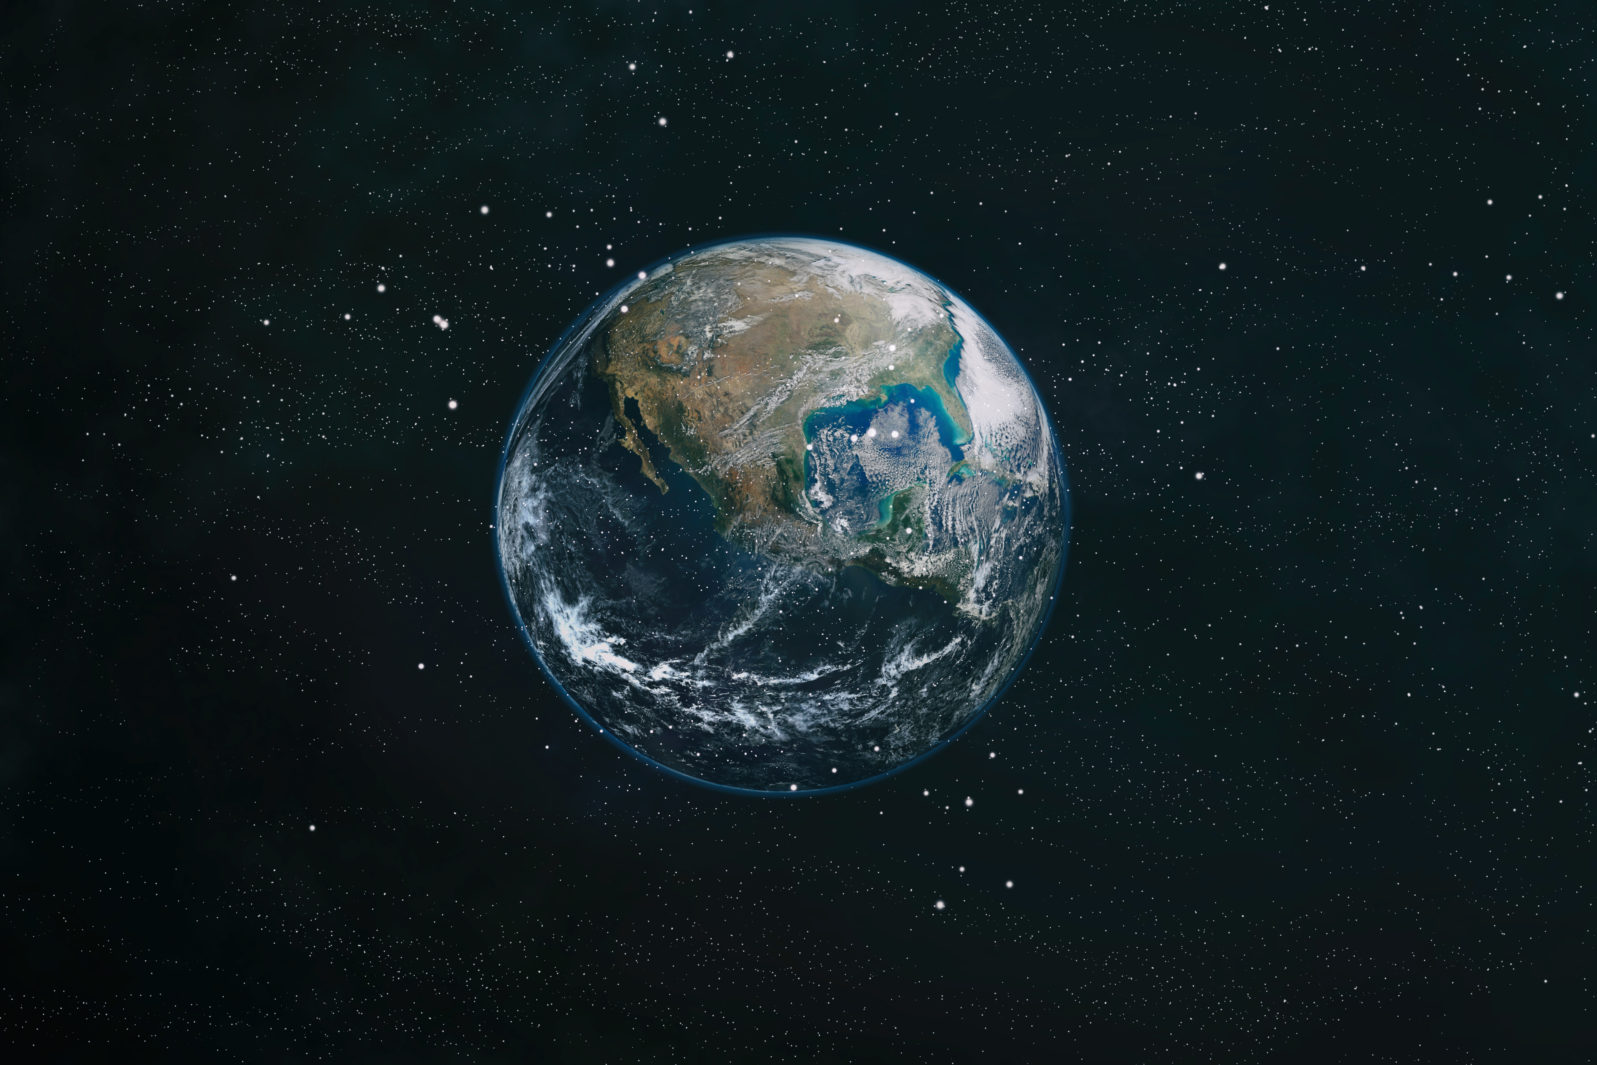 The Earth from space. This image elements furnished by NASA.